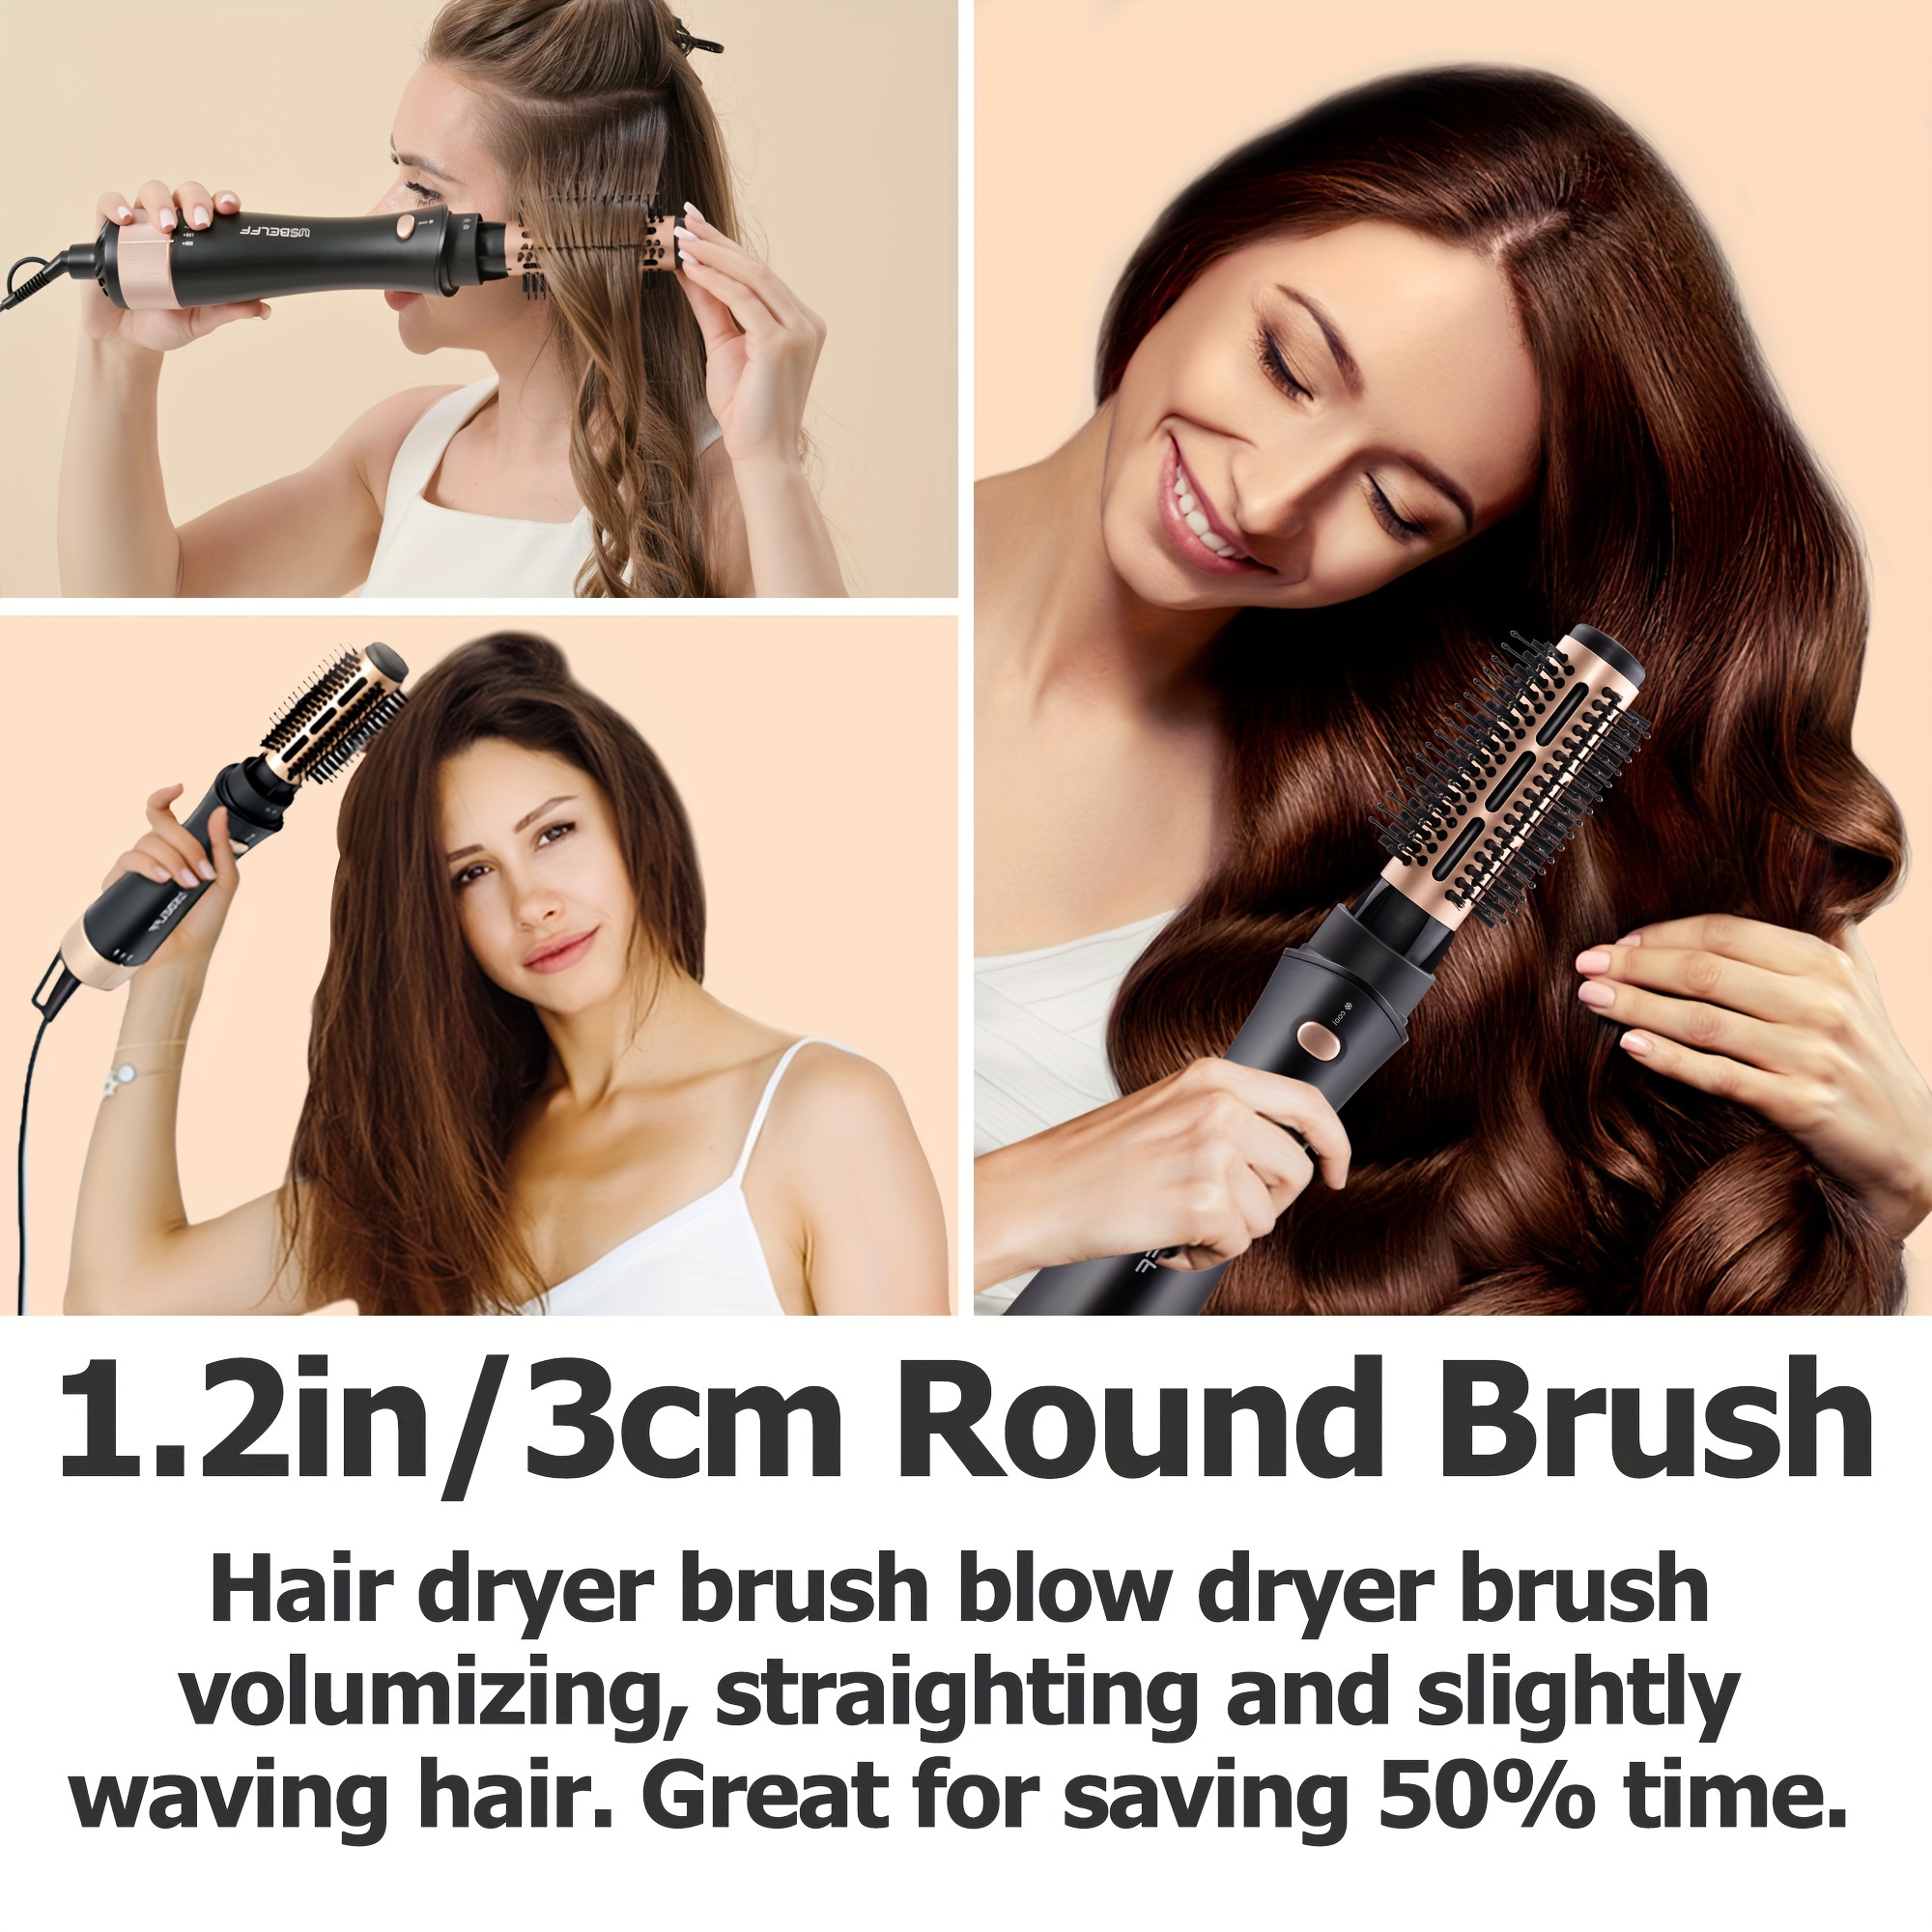 

Hot-air Blow Hair Dryer Brush - One-step Blowout Hot Drying Stying, Volumizer Brushes For All Short Hair Types, Negative Ion Ceramic Round Barrel Styler Brush Smooth Frizz-free (1.2 Inch)